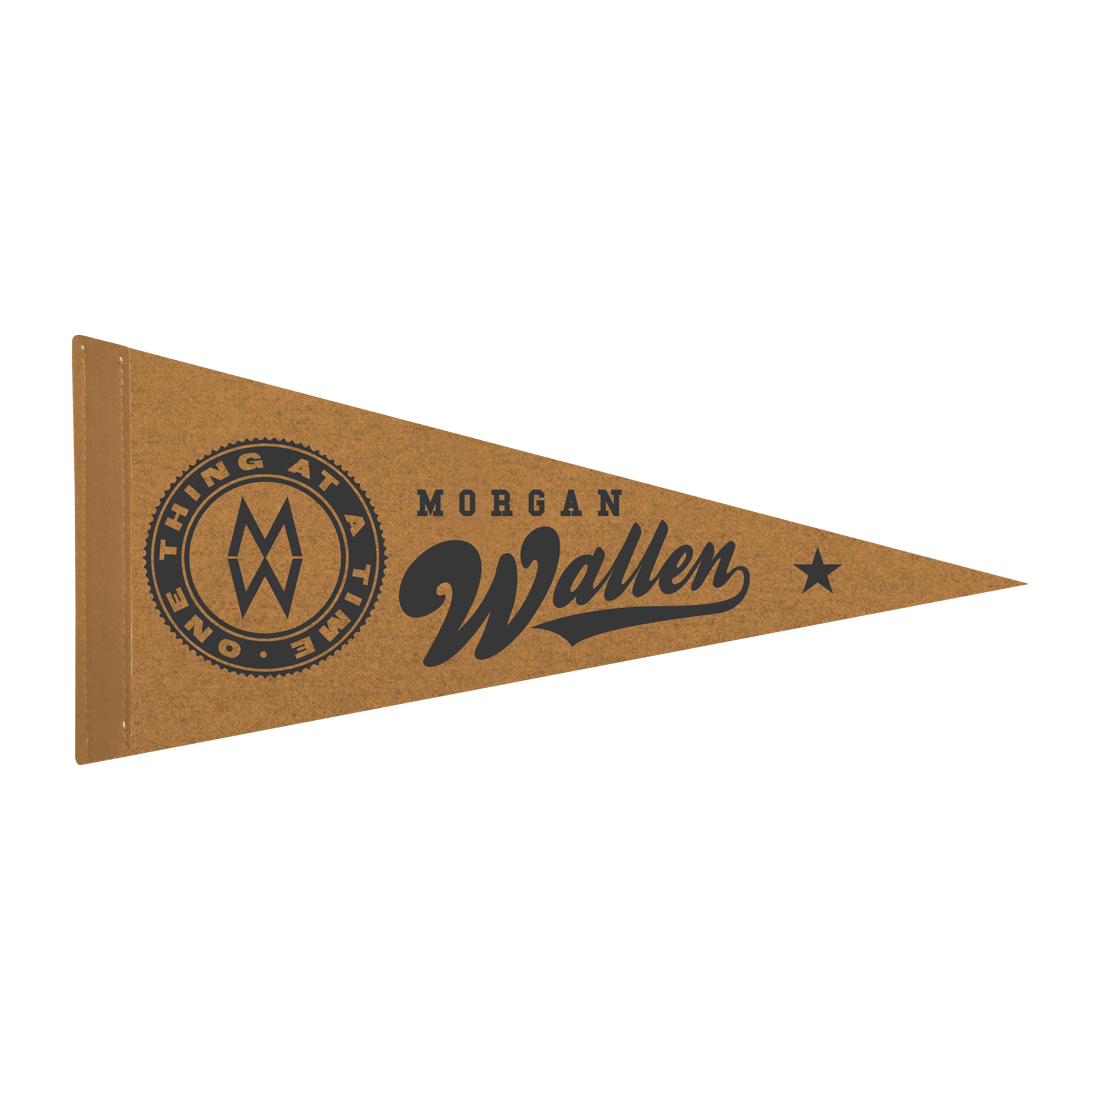 Morgan Wallen - One Thing At A Time Brown Pennant Flag